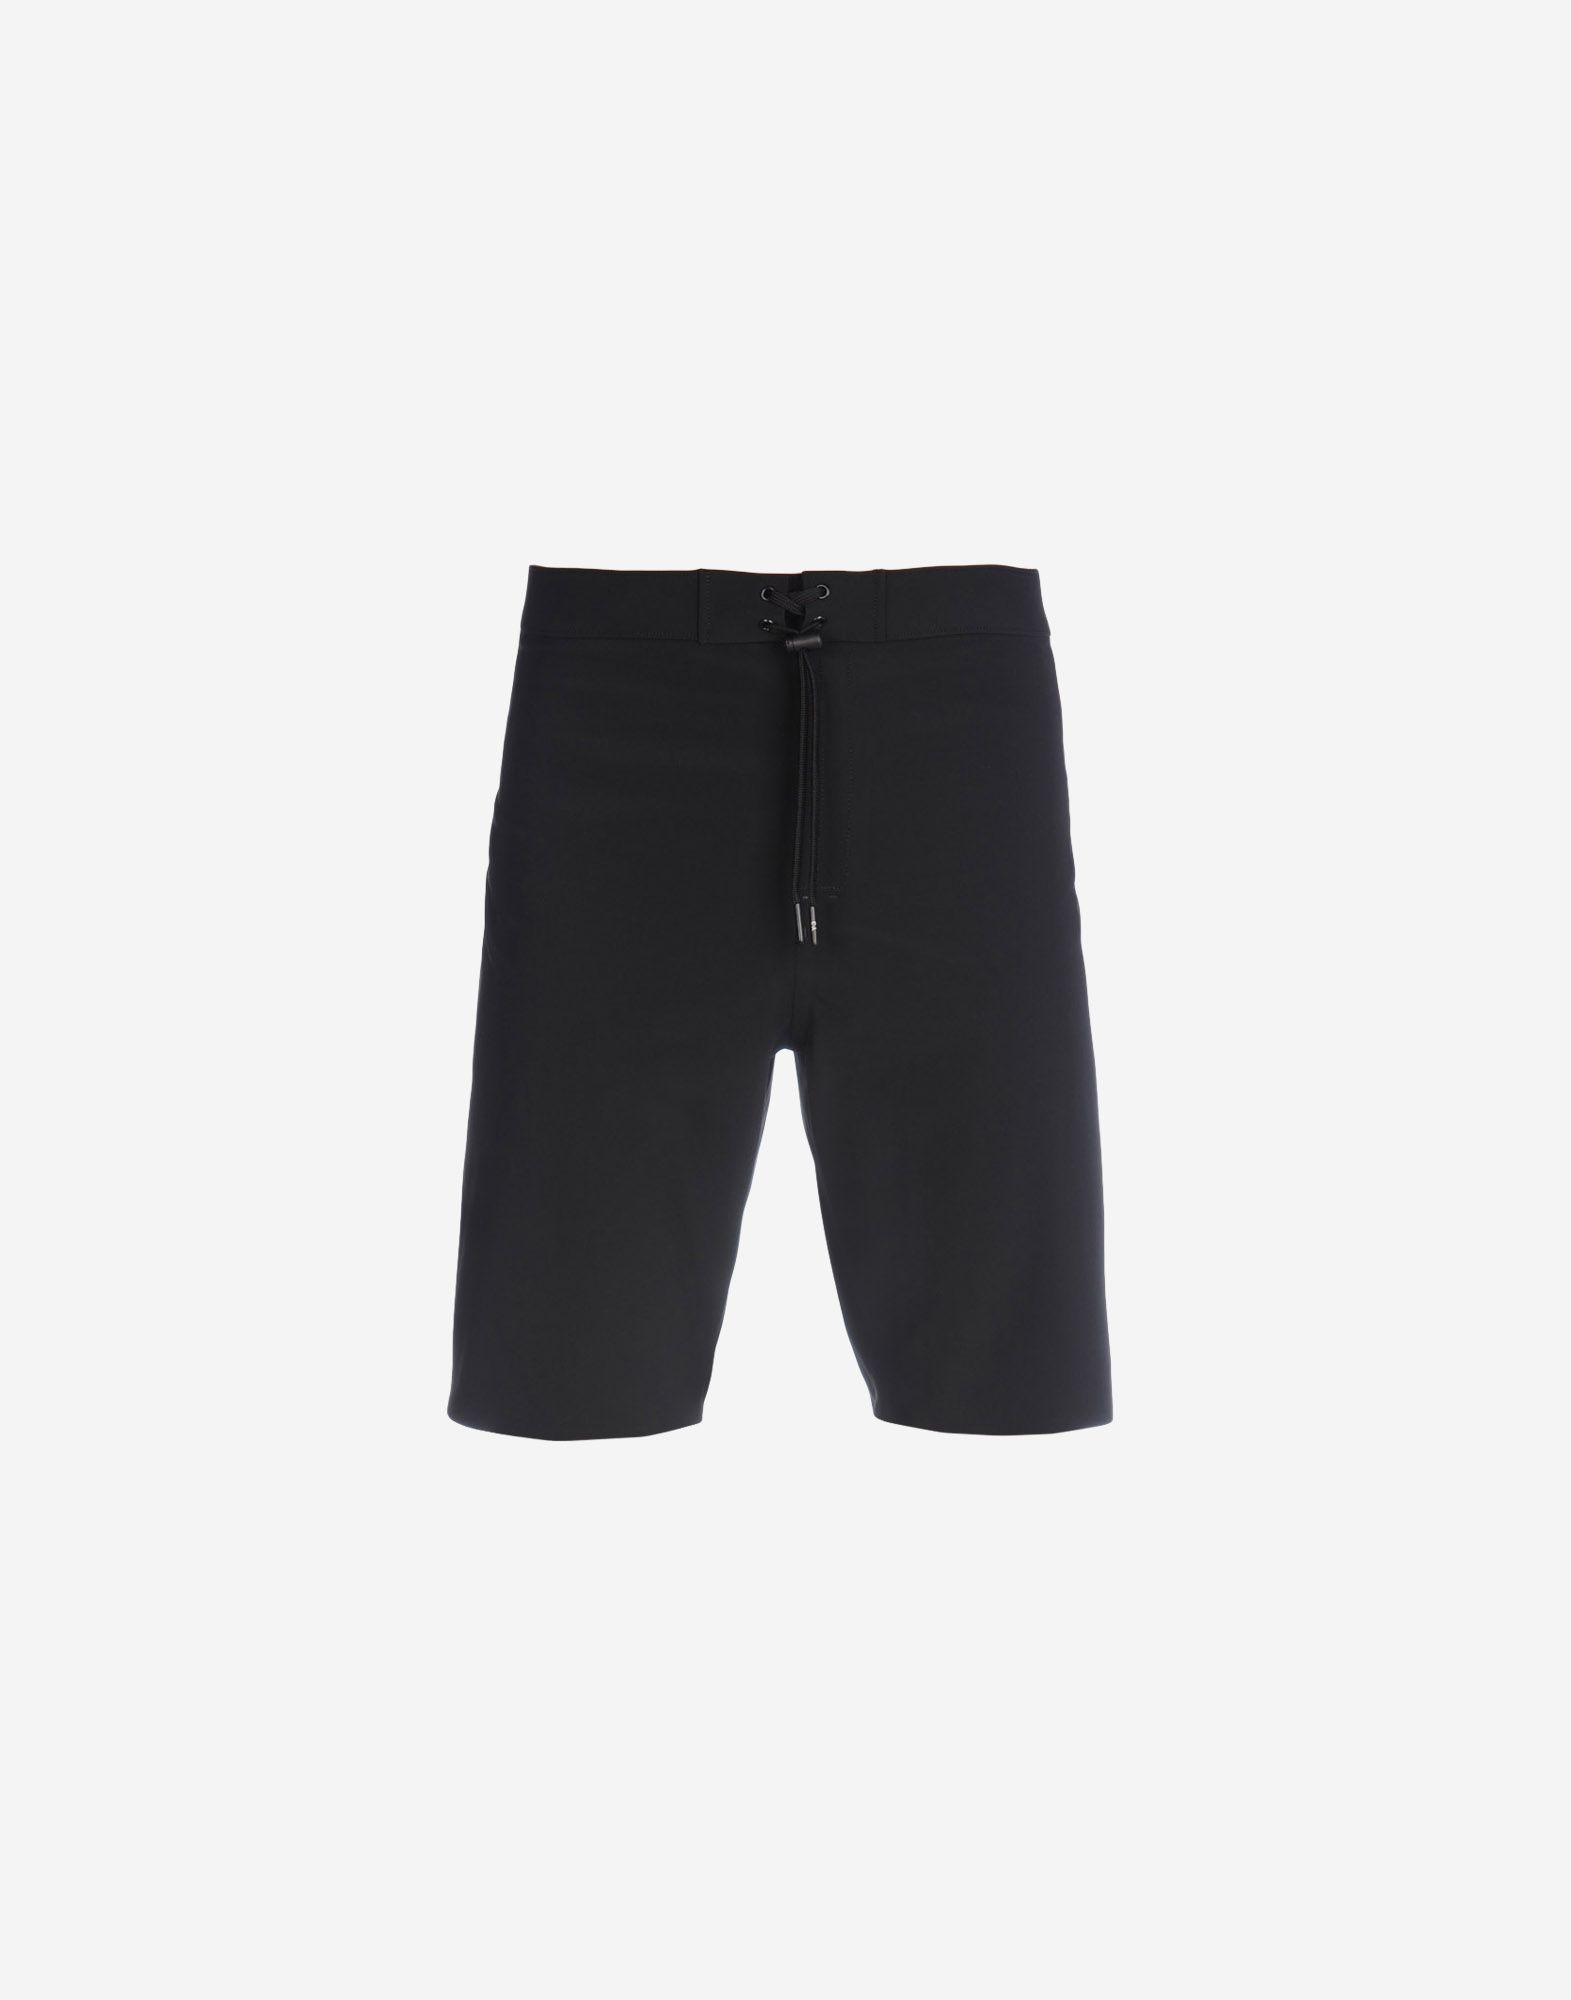 Y 3 Bonded Shorts for Men | Adidas Y-3 Official Store